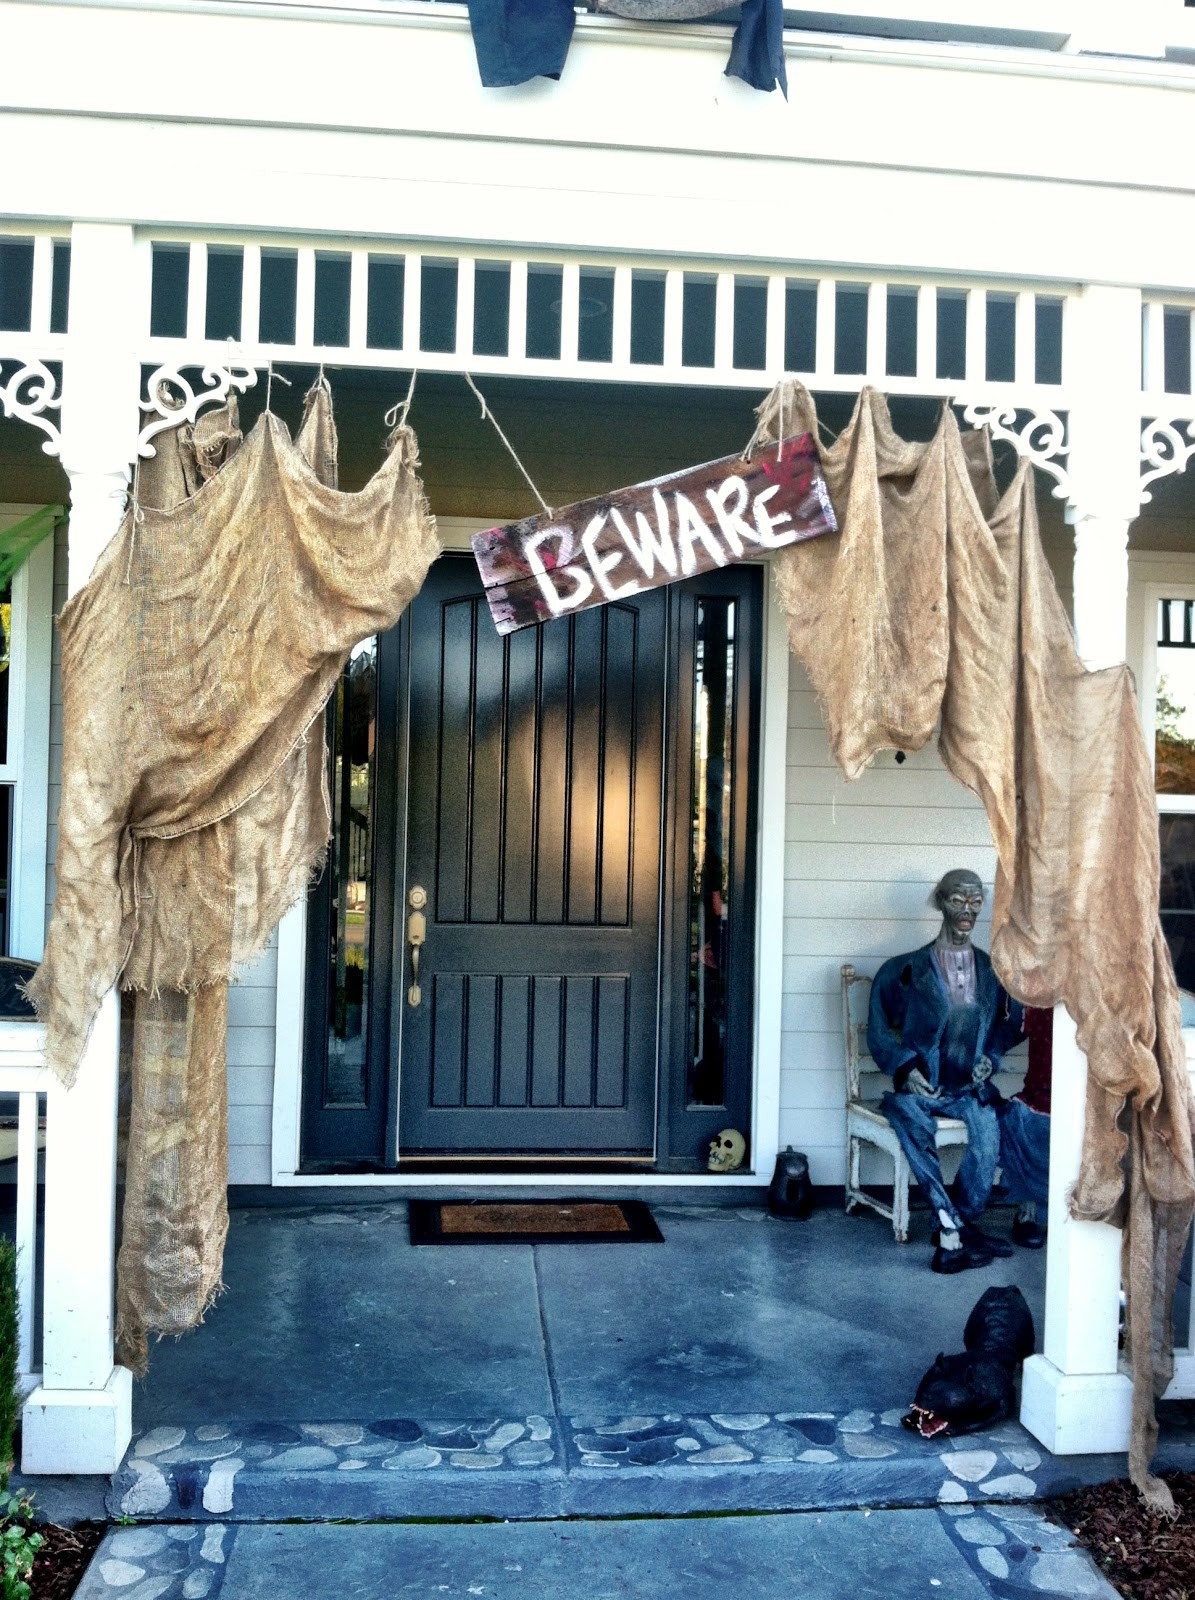 Halloween Porch Decorations
 How to Halloween Curb Appeal